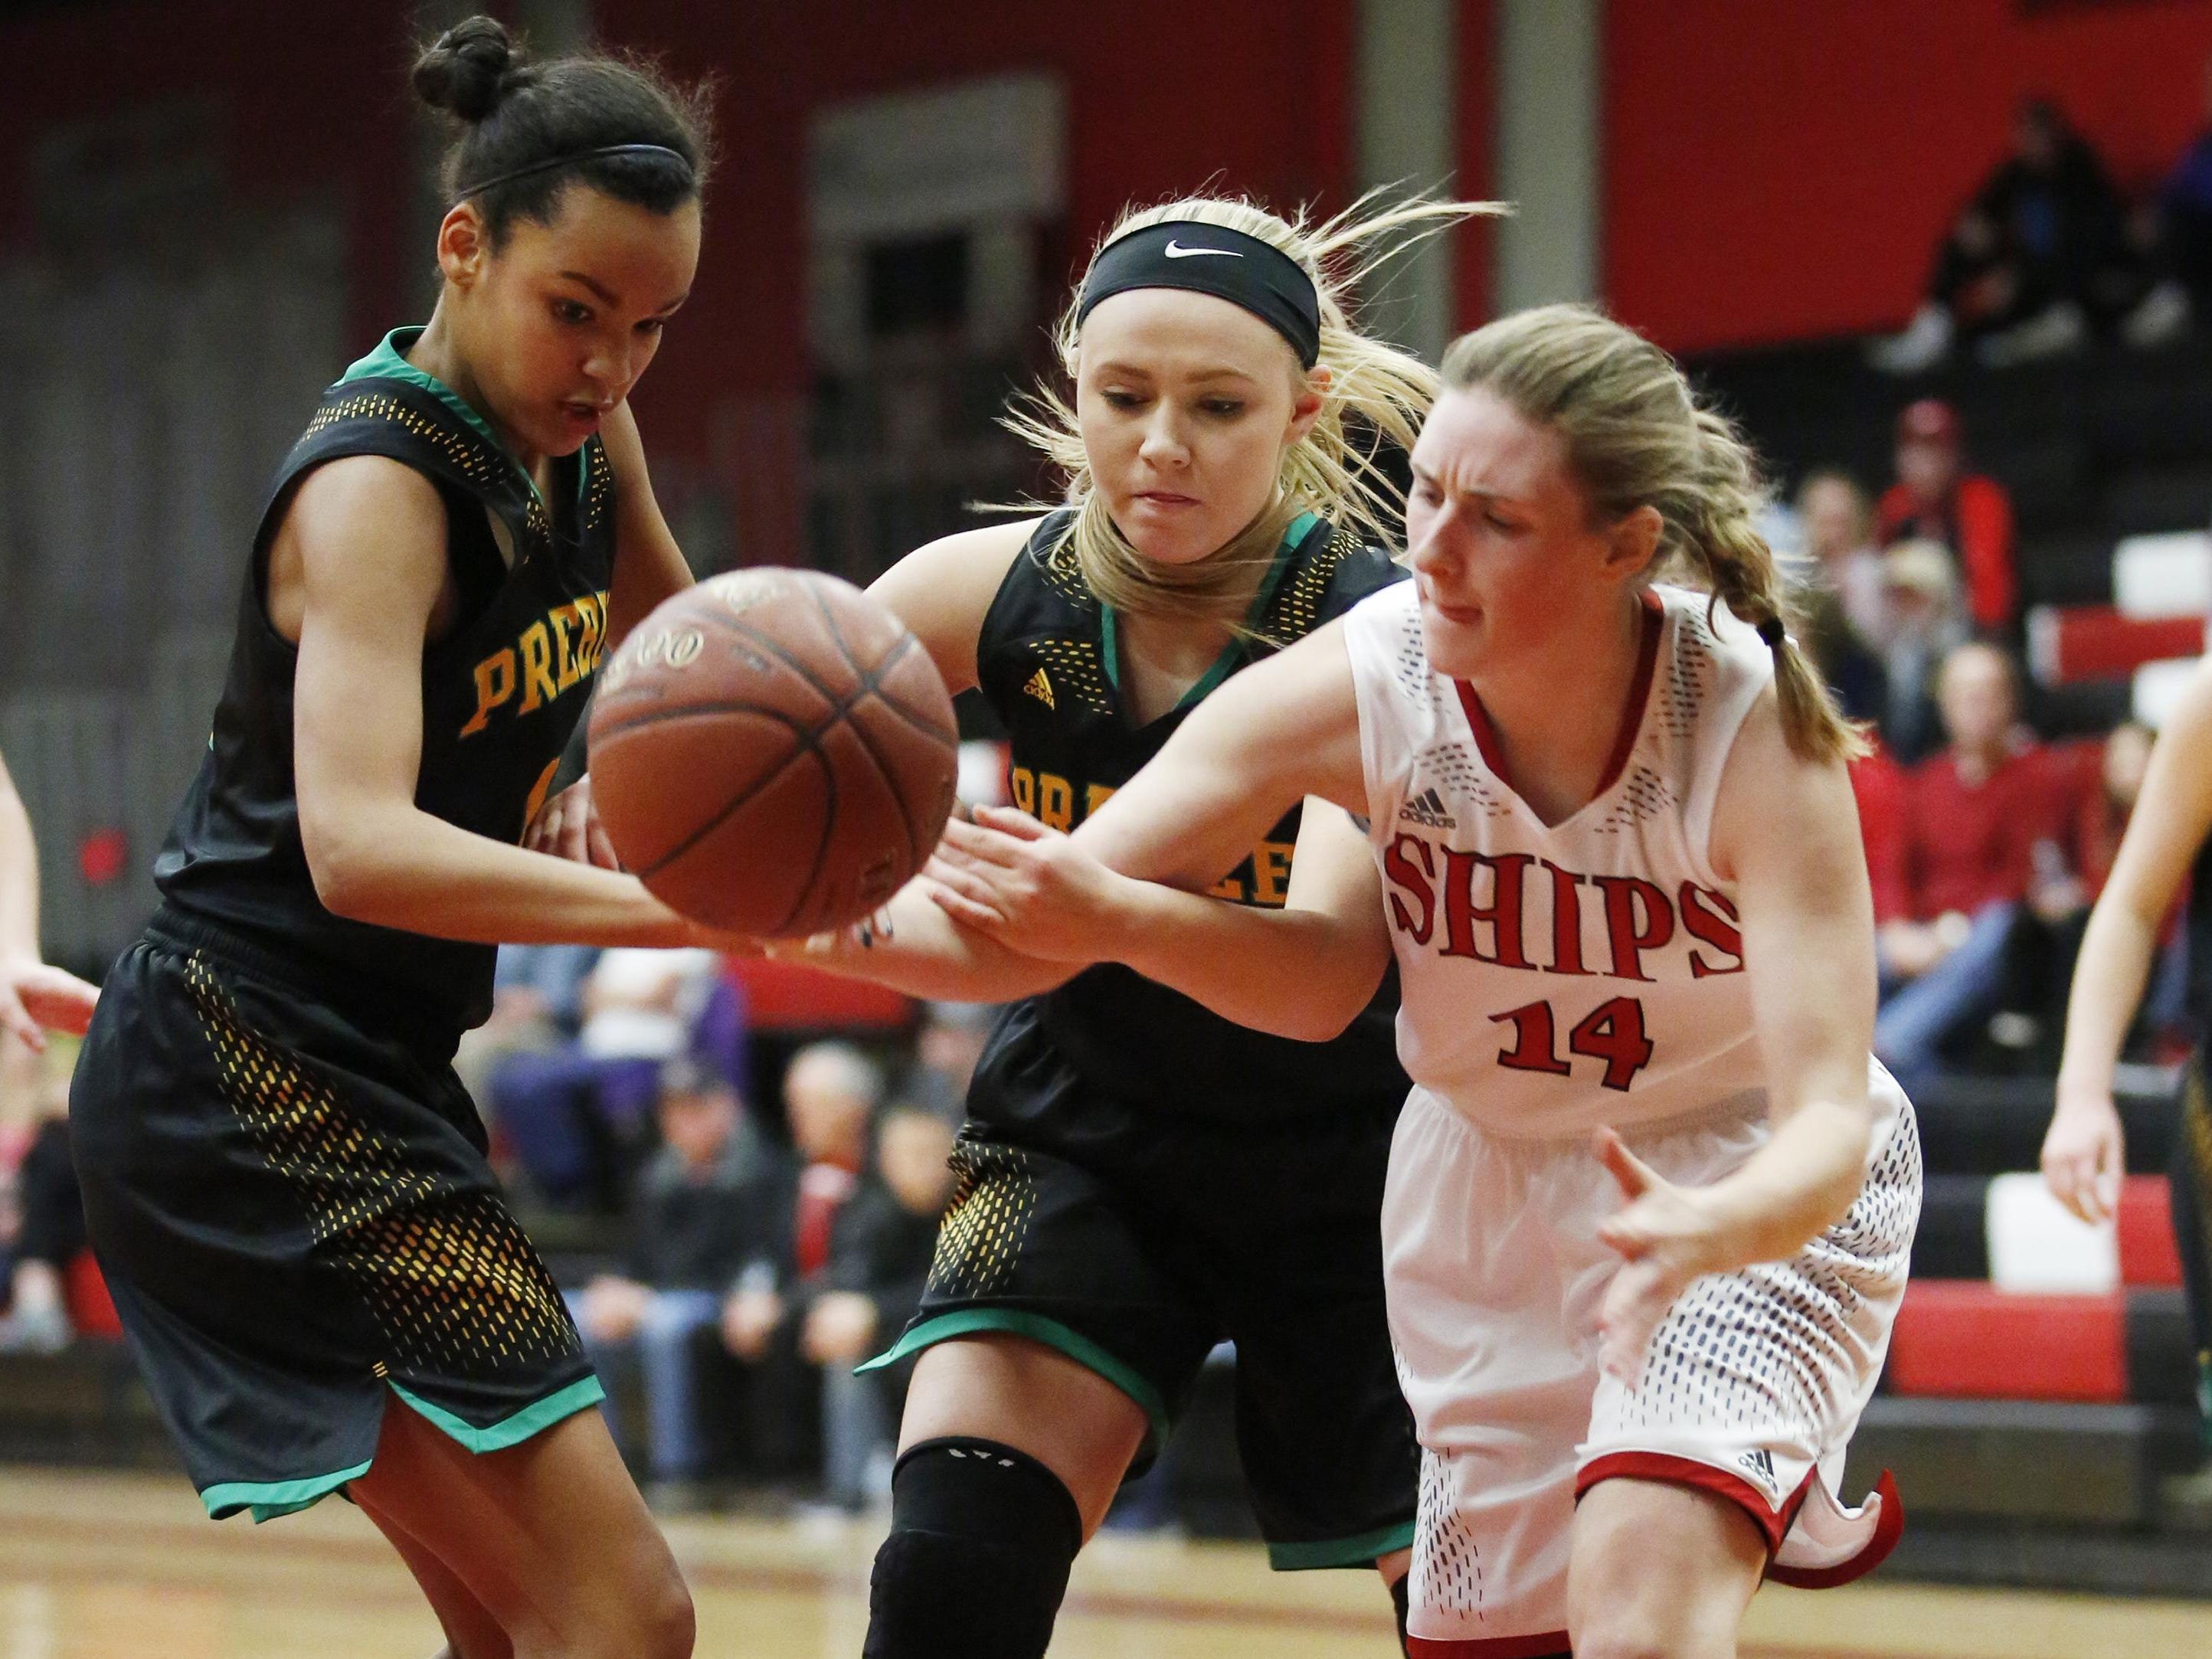 Green Bay Preble players battle with Manitowoc for a loose ball on Tuesday in Manty.